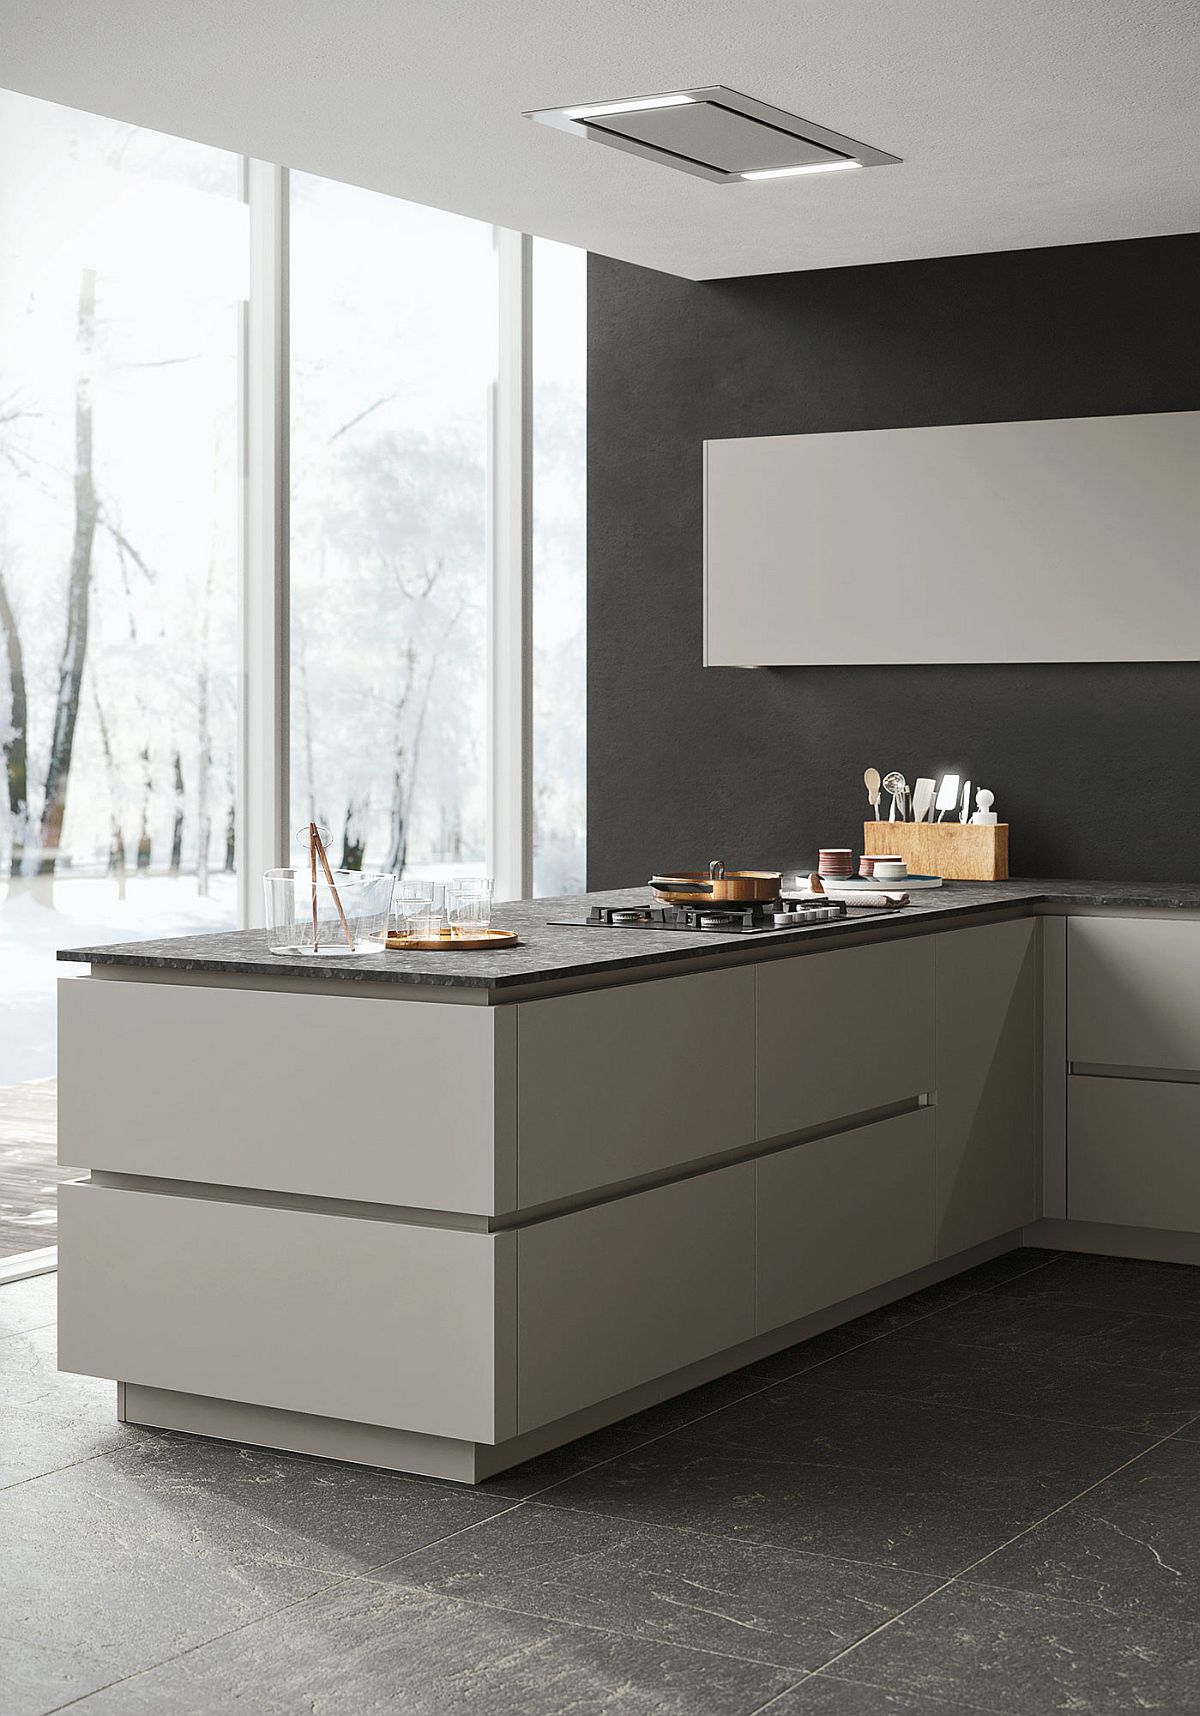 Smart kitchen worktops turn Look into an absolute dream